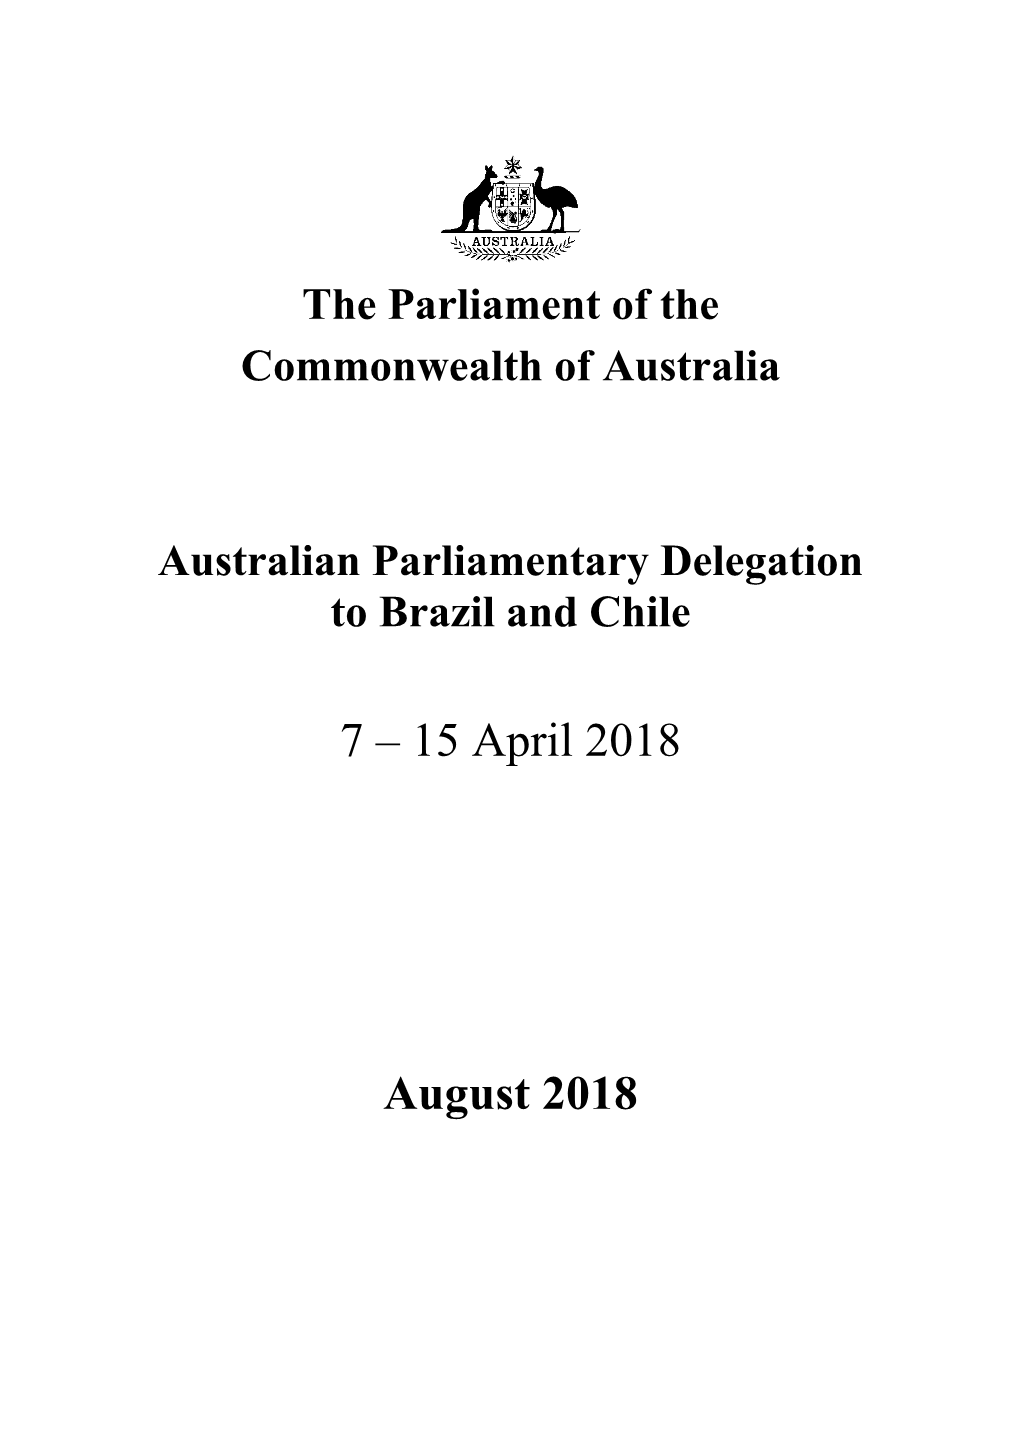 The Parliament of the Commonwealth of Australia